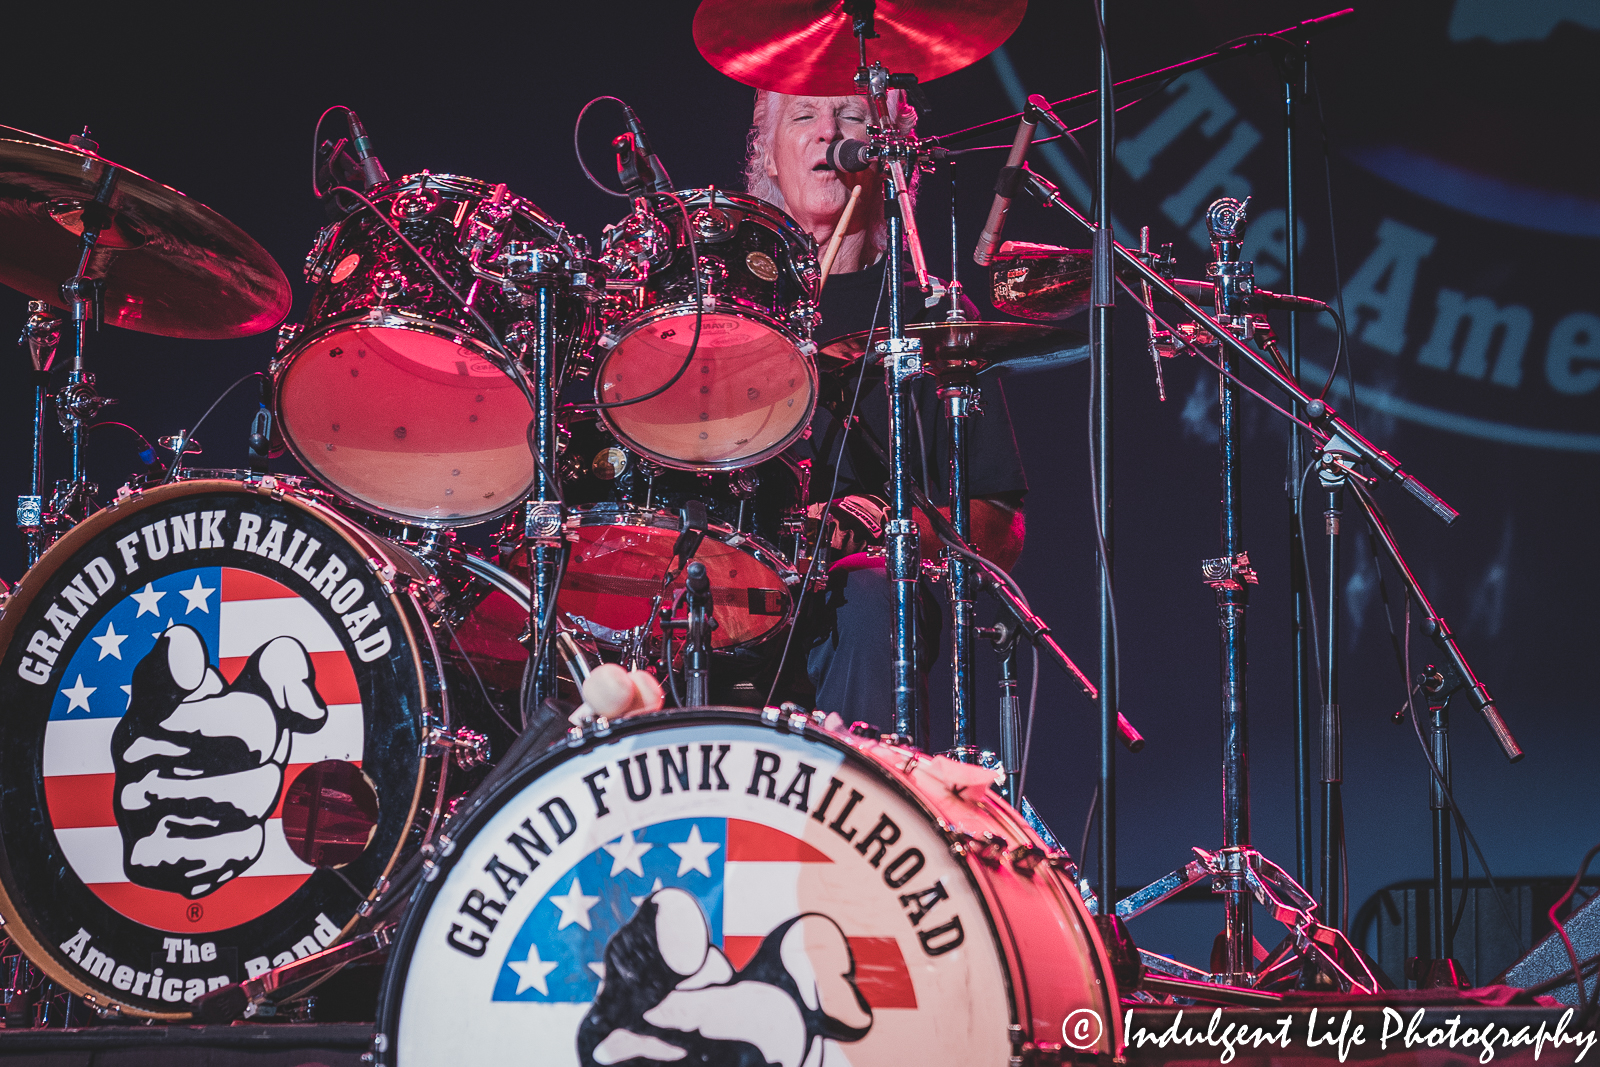 Grand Funk Railroad drummer Don Brewer performing live in concert at Star Pavilion inside of Ameristar Casino in North Kansas City. MO on September 18, 2021.